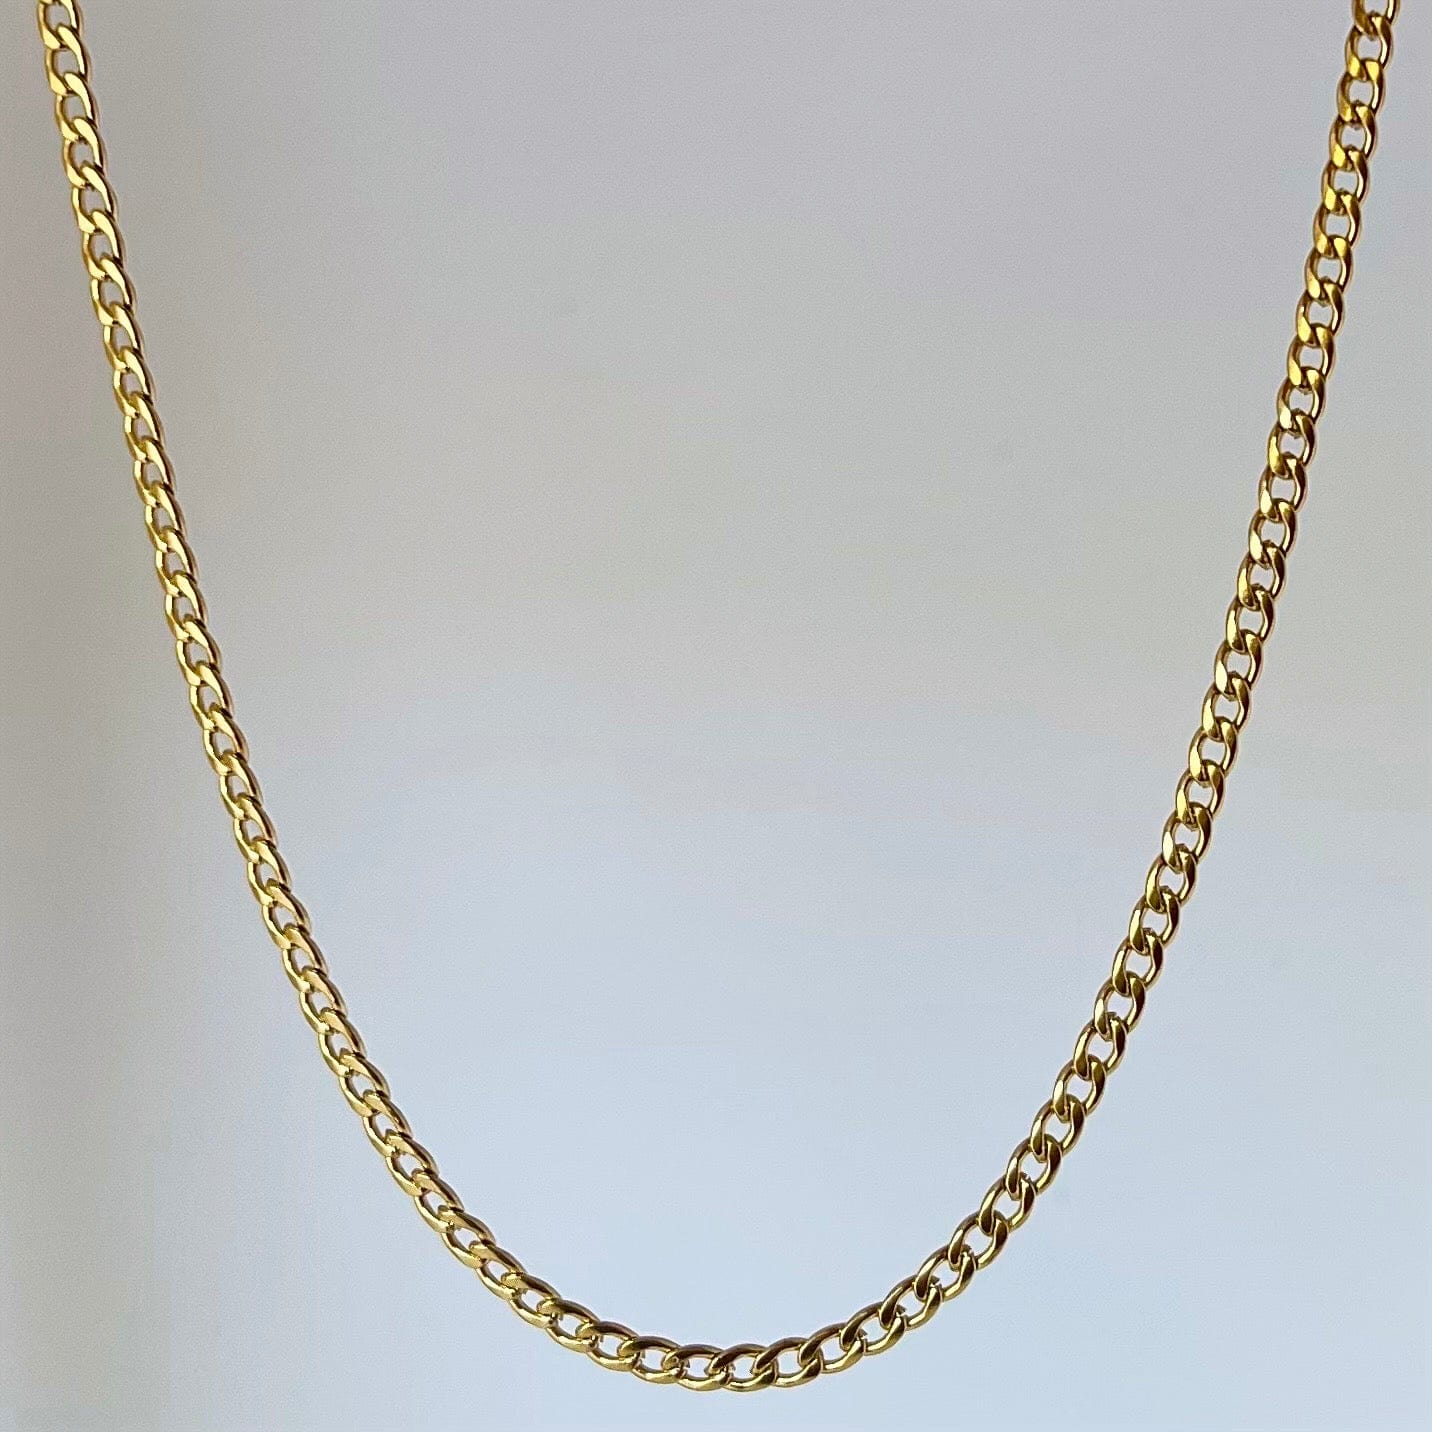 Asanti by Koi Necklaces Gold Neema Chain (Silver or Gold)